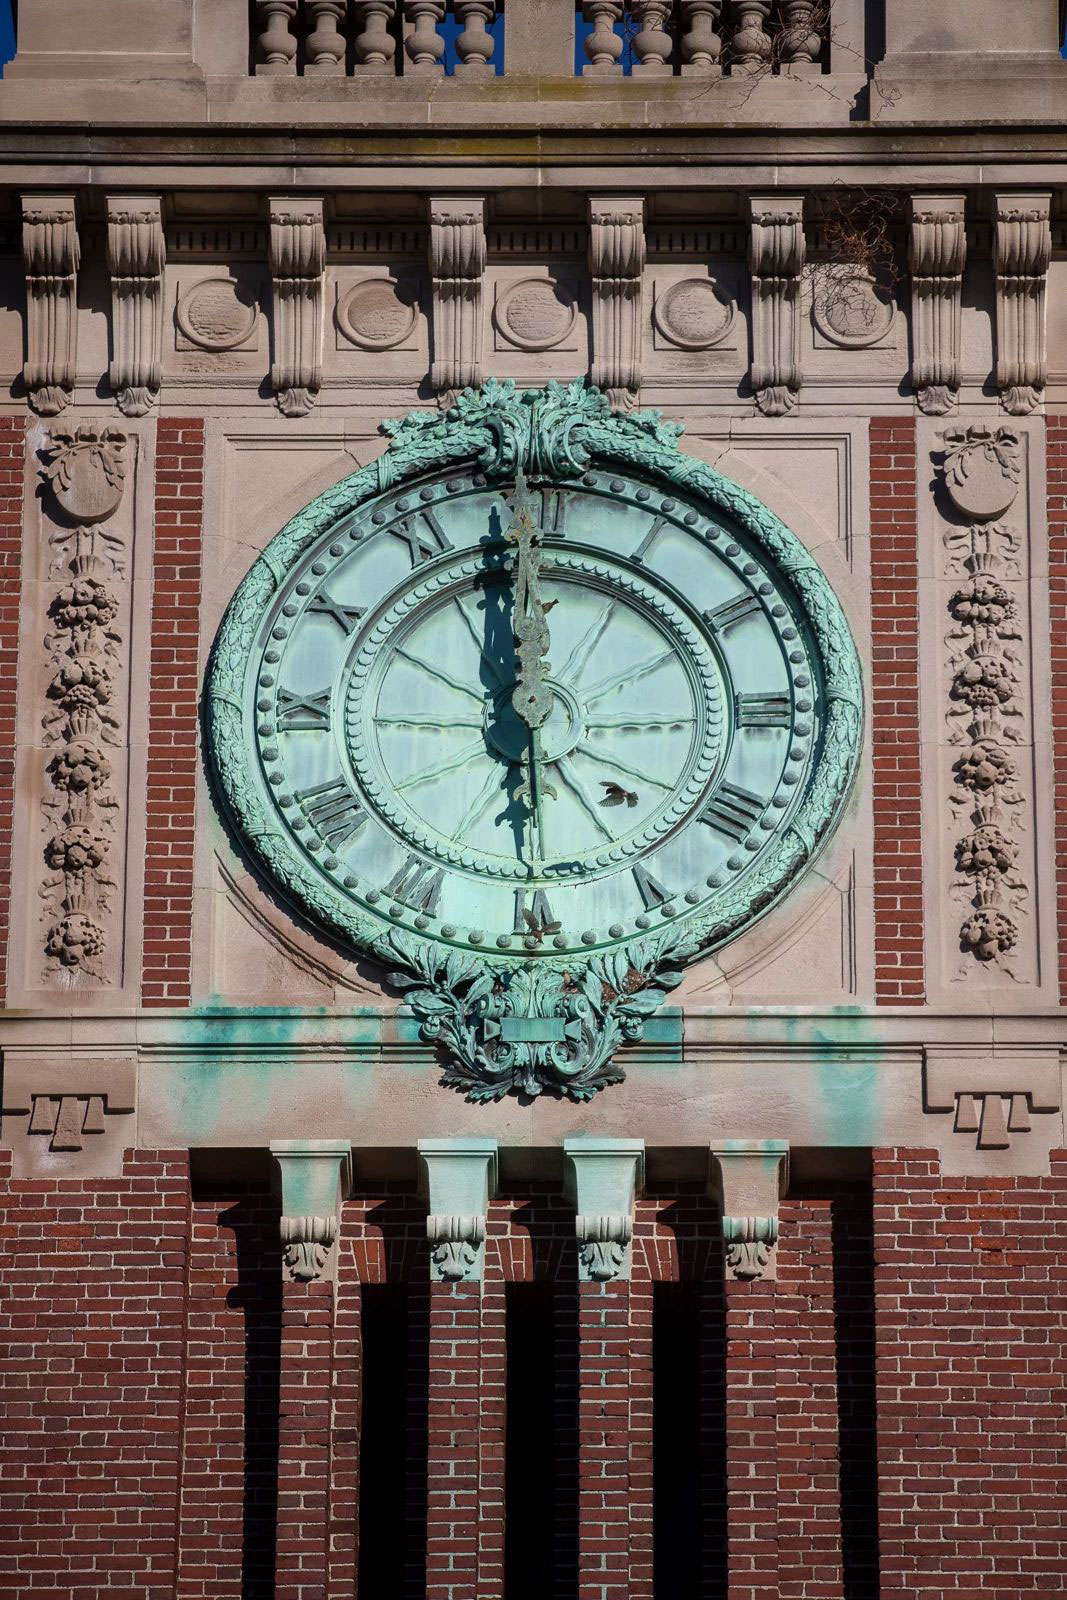 A closeup shows one of the tower's clock faces